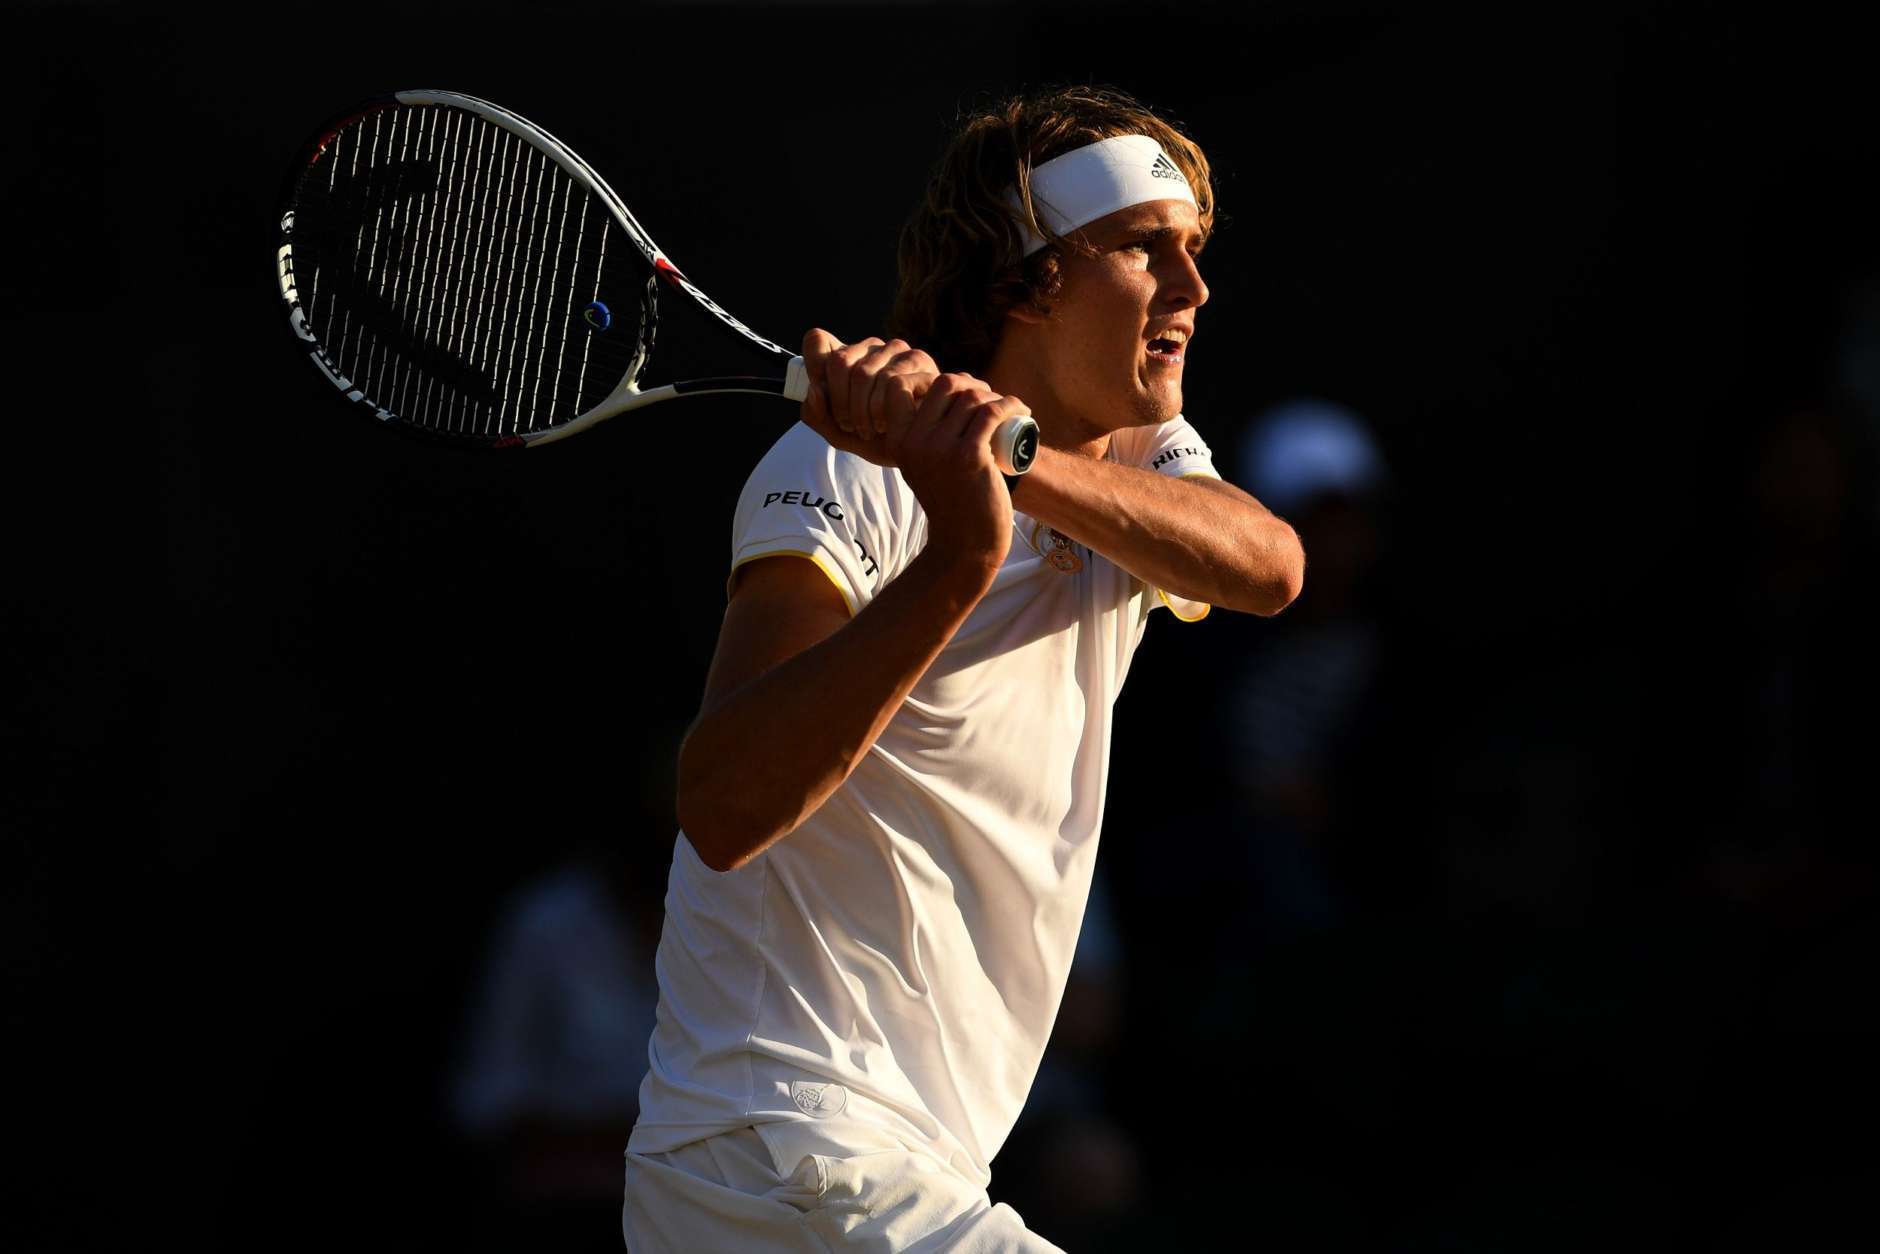 LONDON, ENGLAND - JULY 10:  Alexander Zverev of Germany plays a backhand during the Gentlemen's Singles fourth round match against Milos Raonic of Canada on day seven of the Wimbledon Lawn Tennis Championships at the All England Lawn Tennis and Croquet Club on July 10, 2017 in London, England.  (Photo by Shaun Botterill/Getty Images)